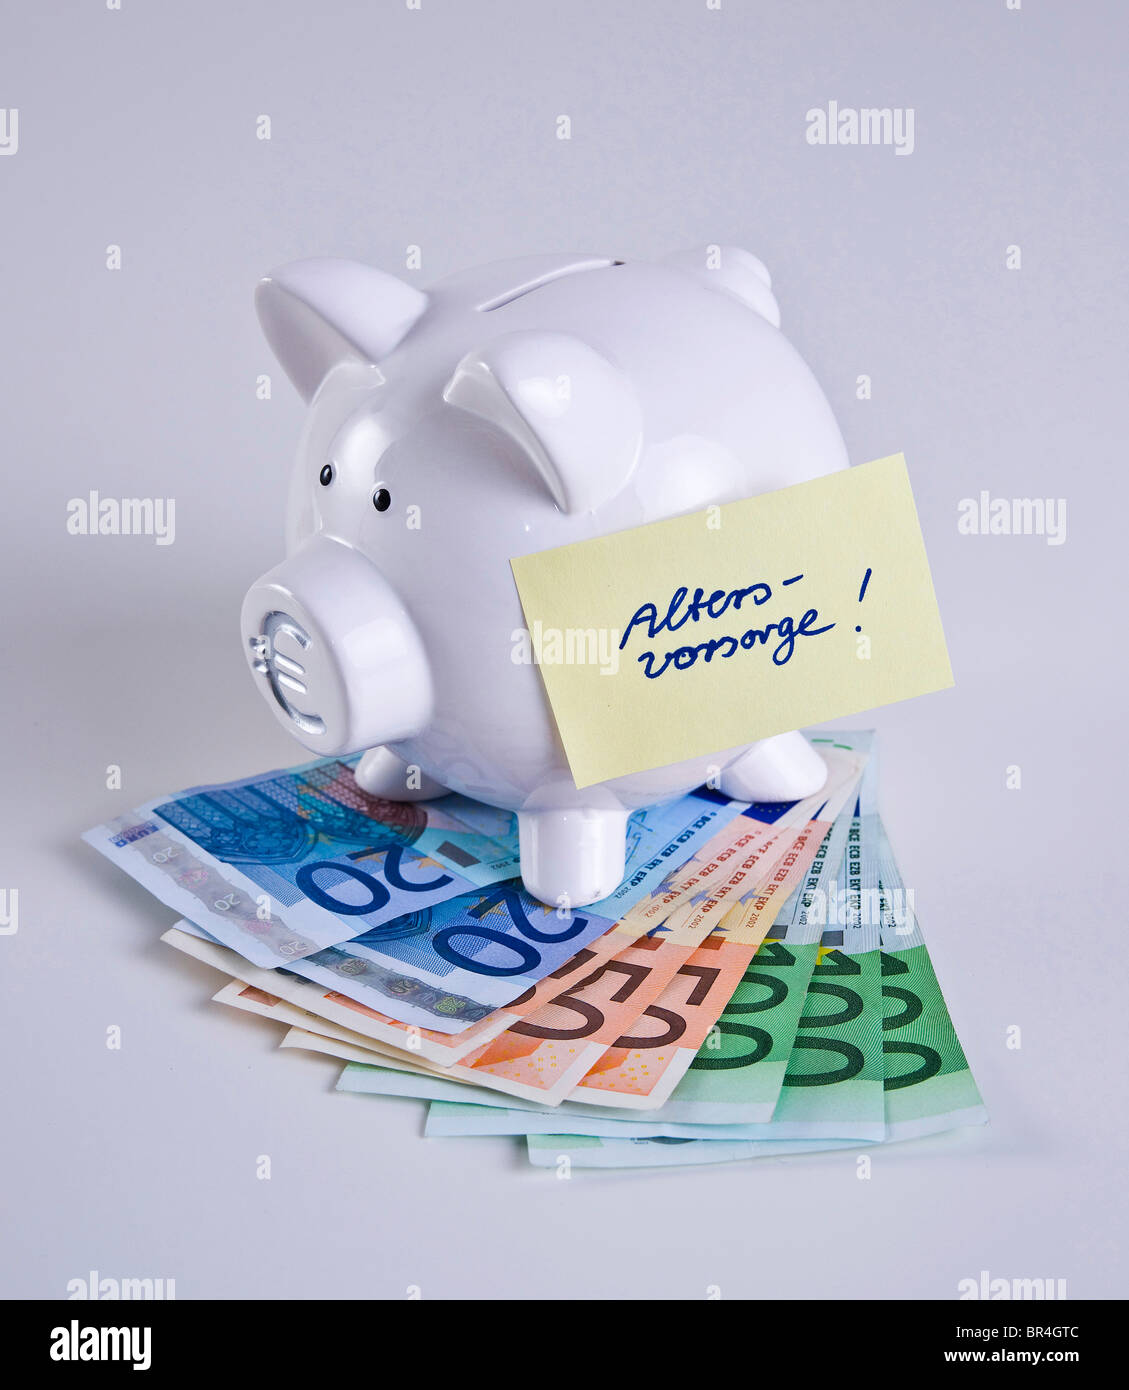 Piggy bank on bank notes, 'Altersvorsorge', pension plan written on a piece of paper Stock Photo